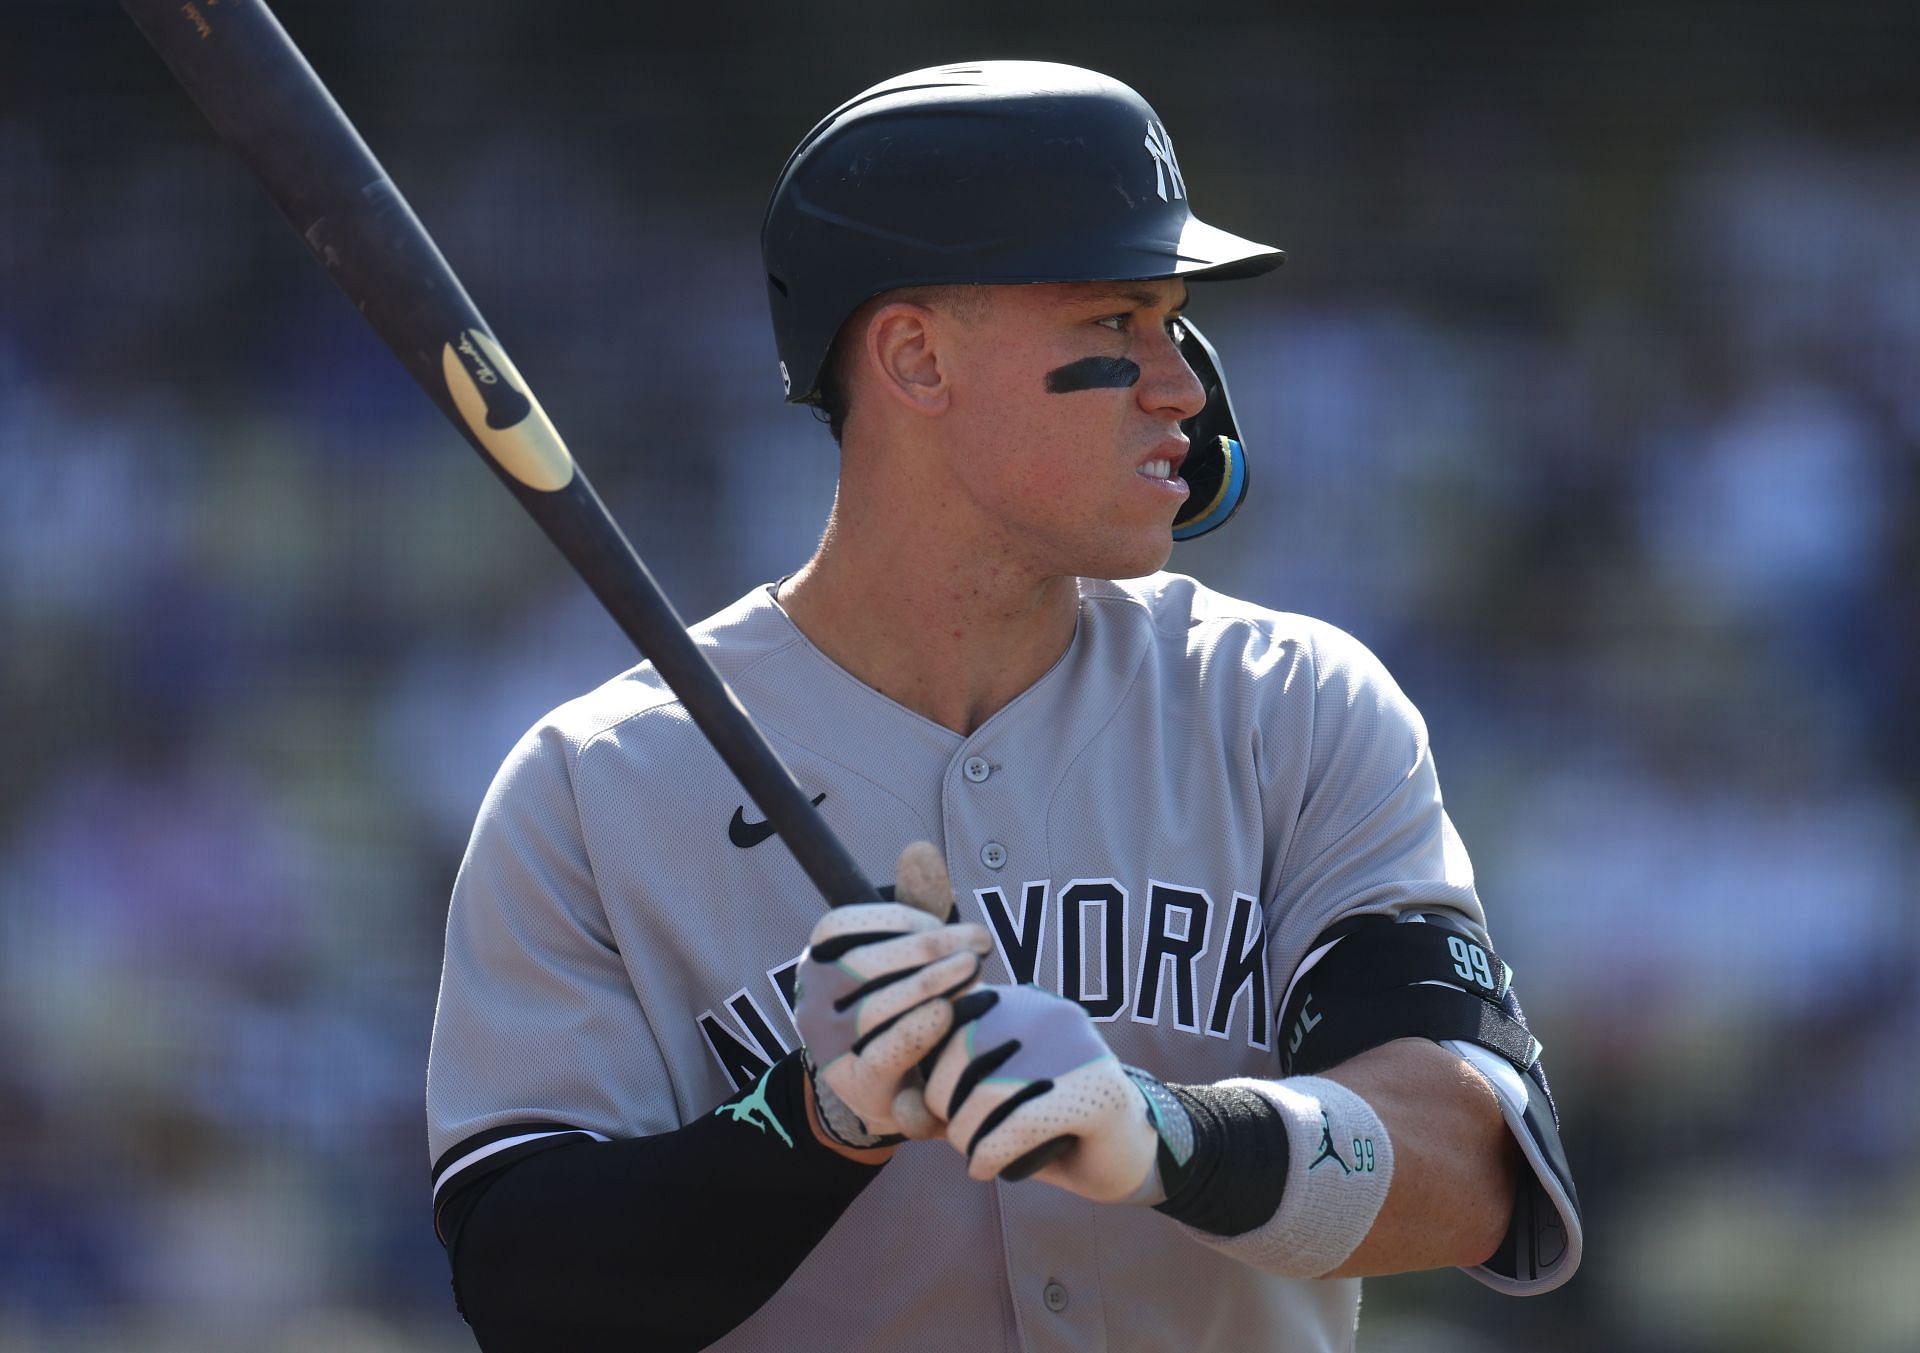 Aaron Judge #99 of the New York Yankees on deck against the Los Angeles Dodgers